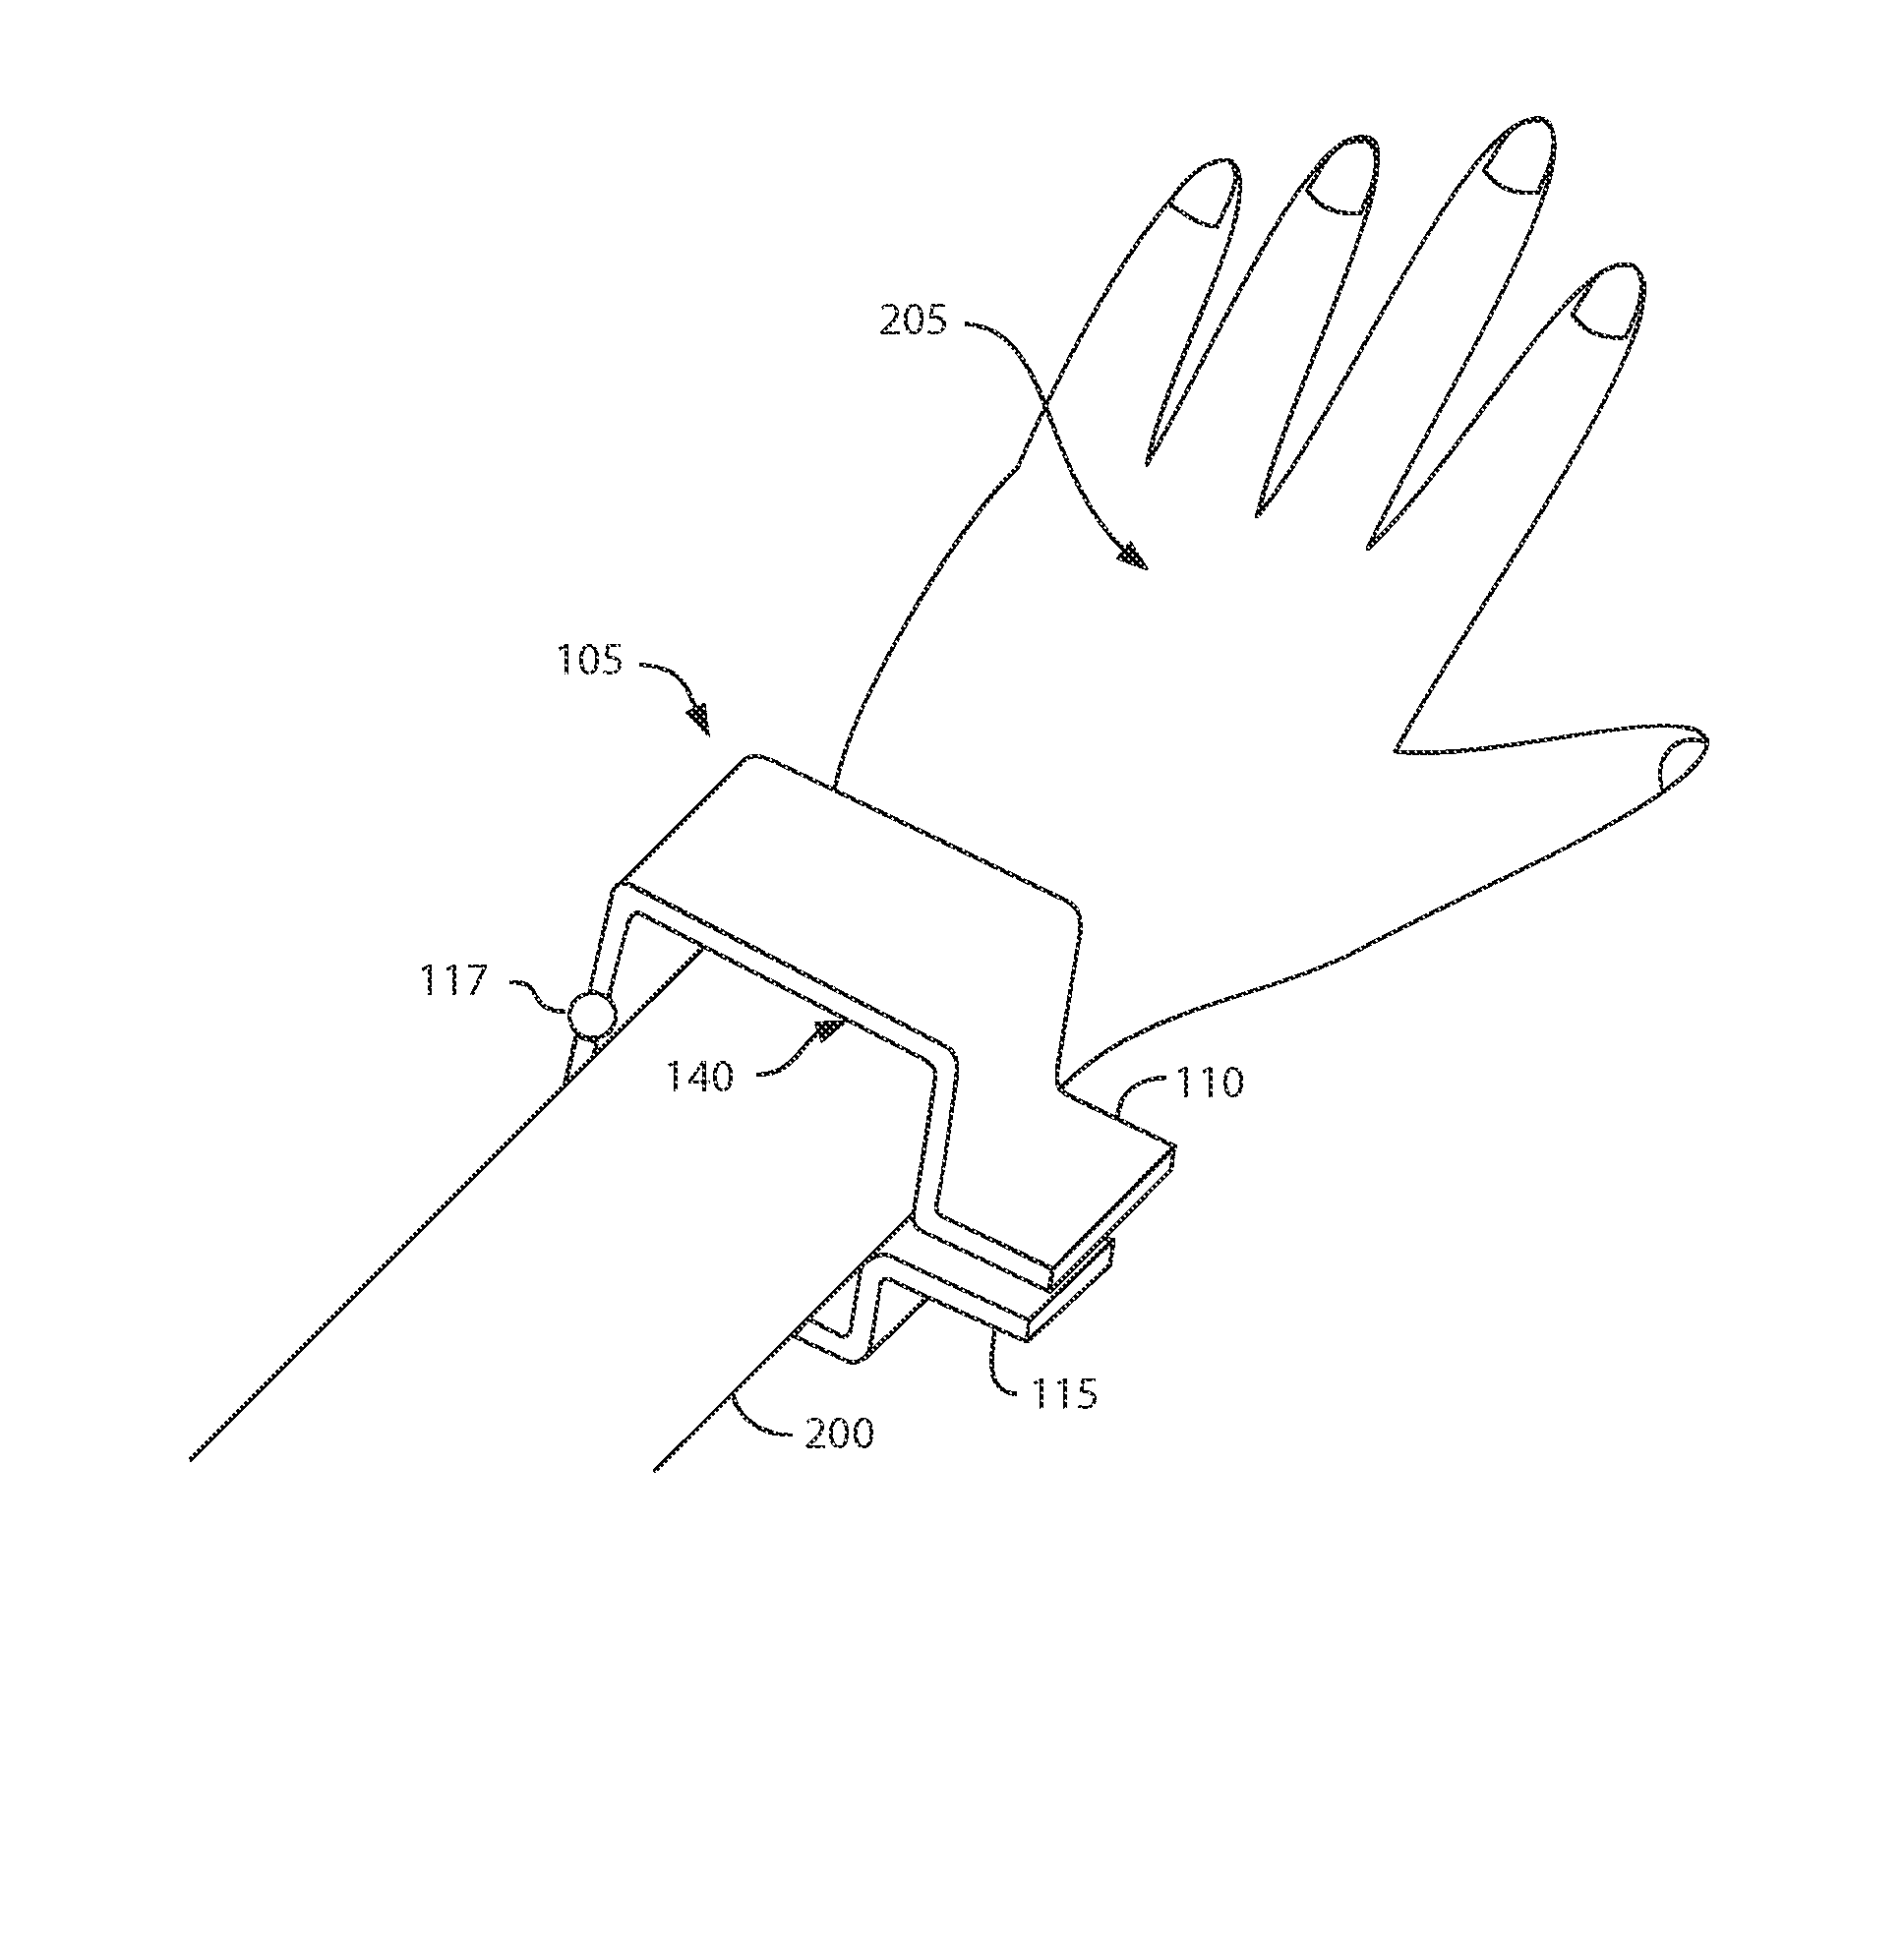 Identifying hand gestures based on muscle movement in the arm